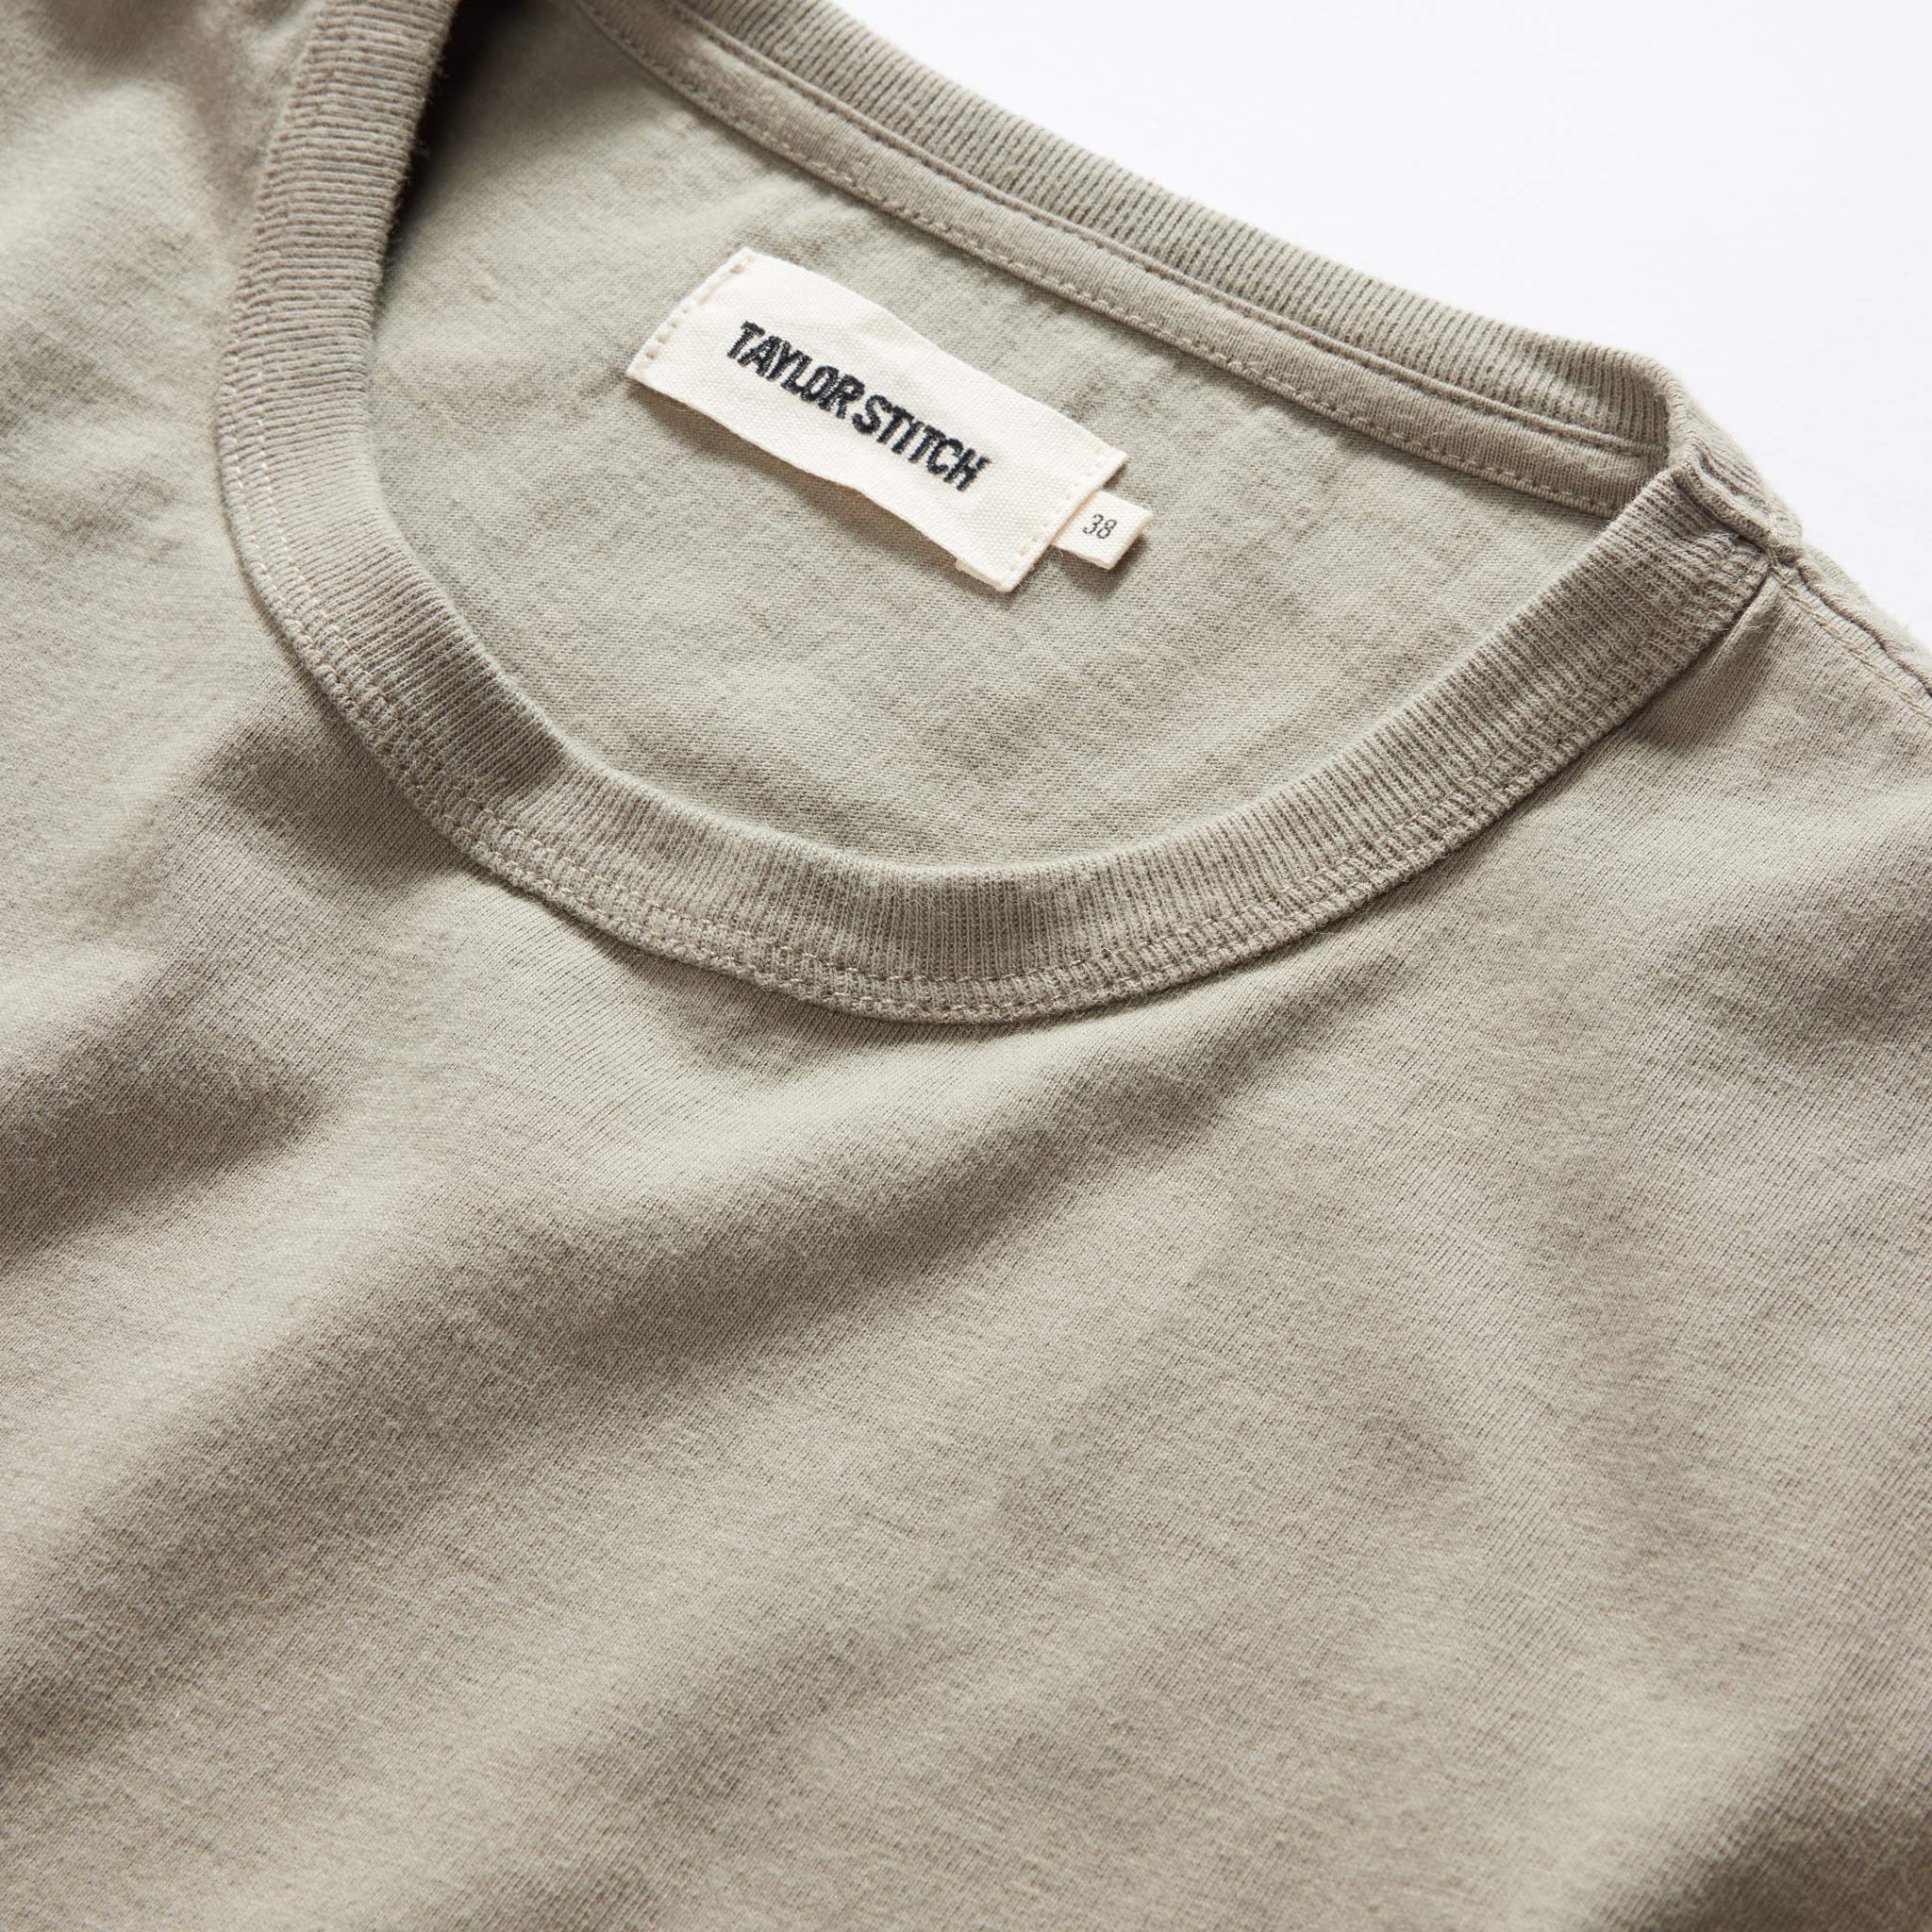 The Organic Cotton Tee in Sage | Taylor Stitch - Classic Men’s Clothing